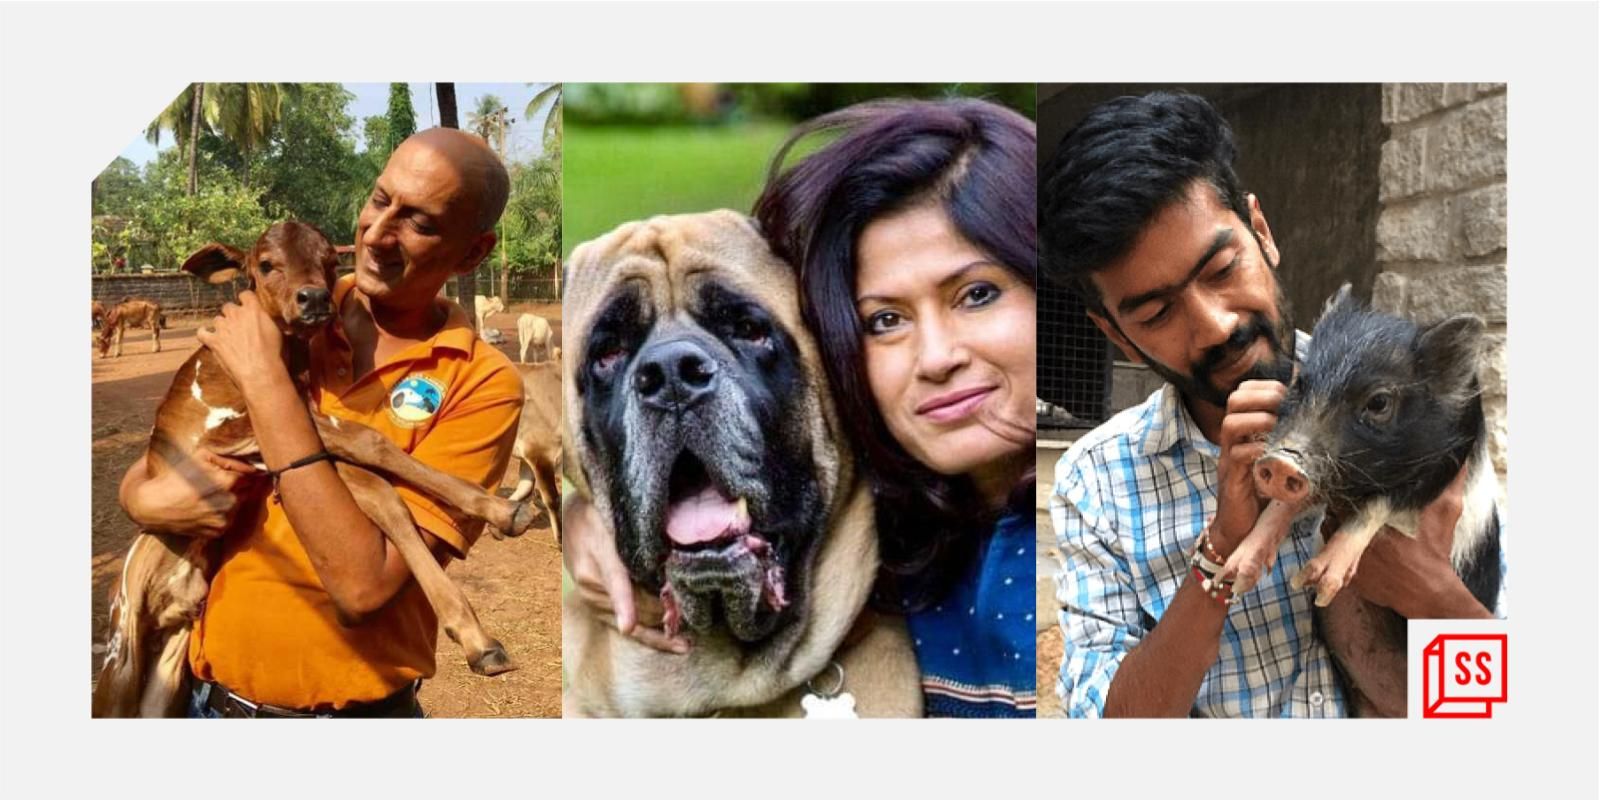 Meet 5 changemakers who have dedicated their lives to taking care of animals  across the country